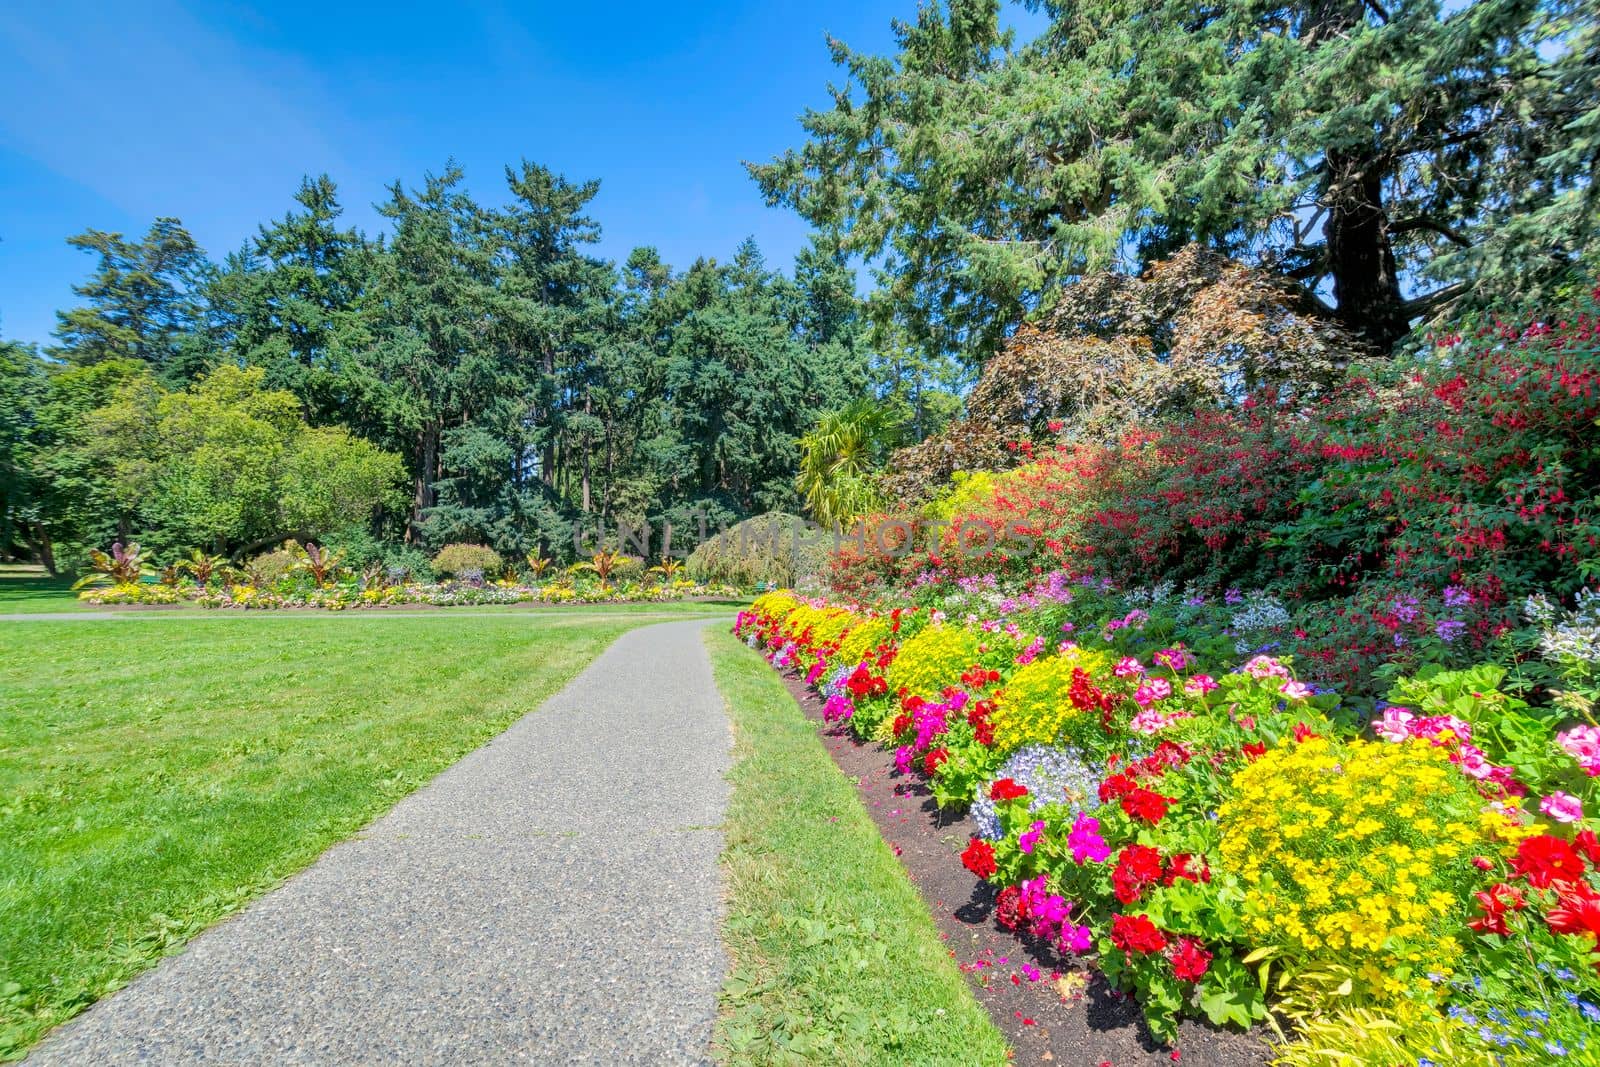 Green wide open meadow in a park with paved pathway and blossoming flowers along the way. Victoria, British Columbia